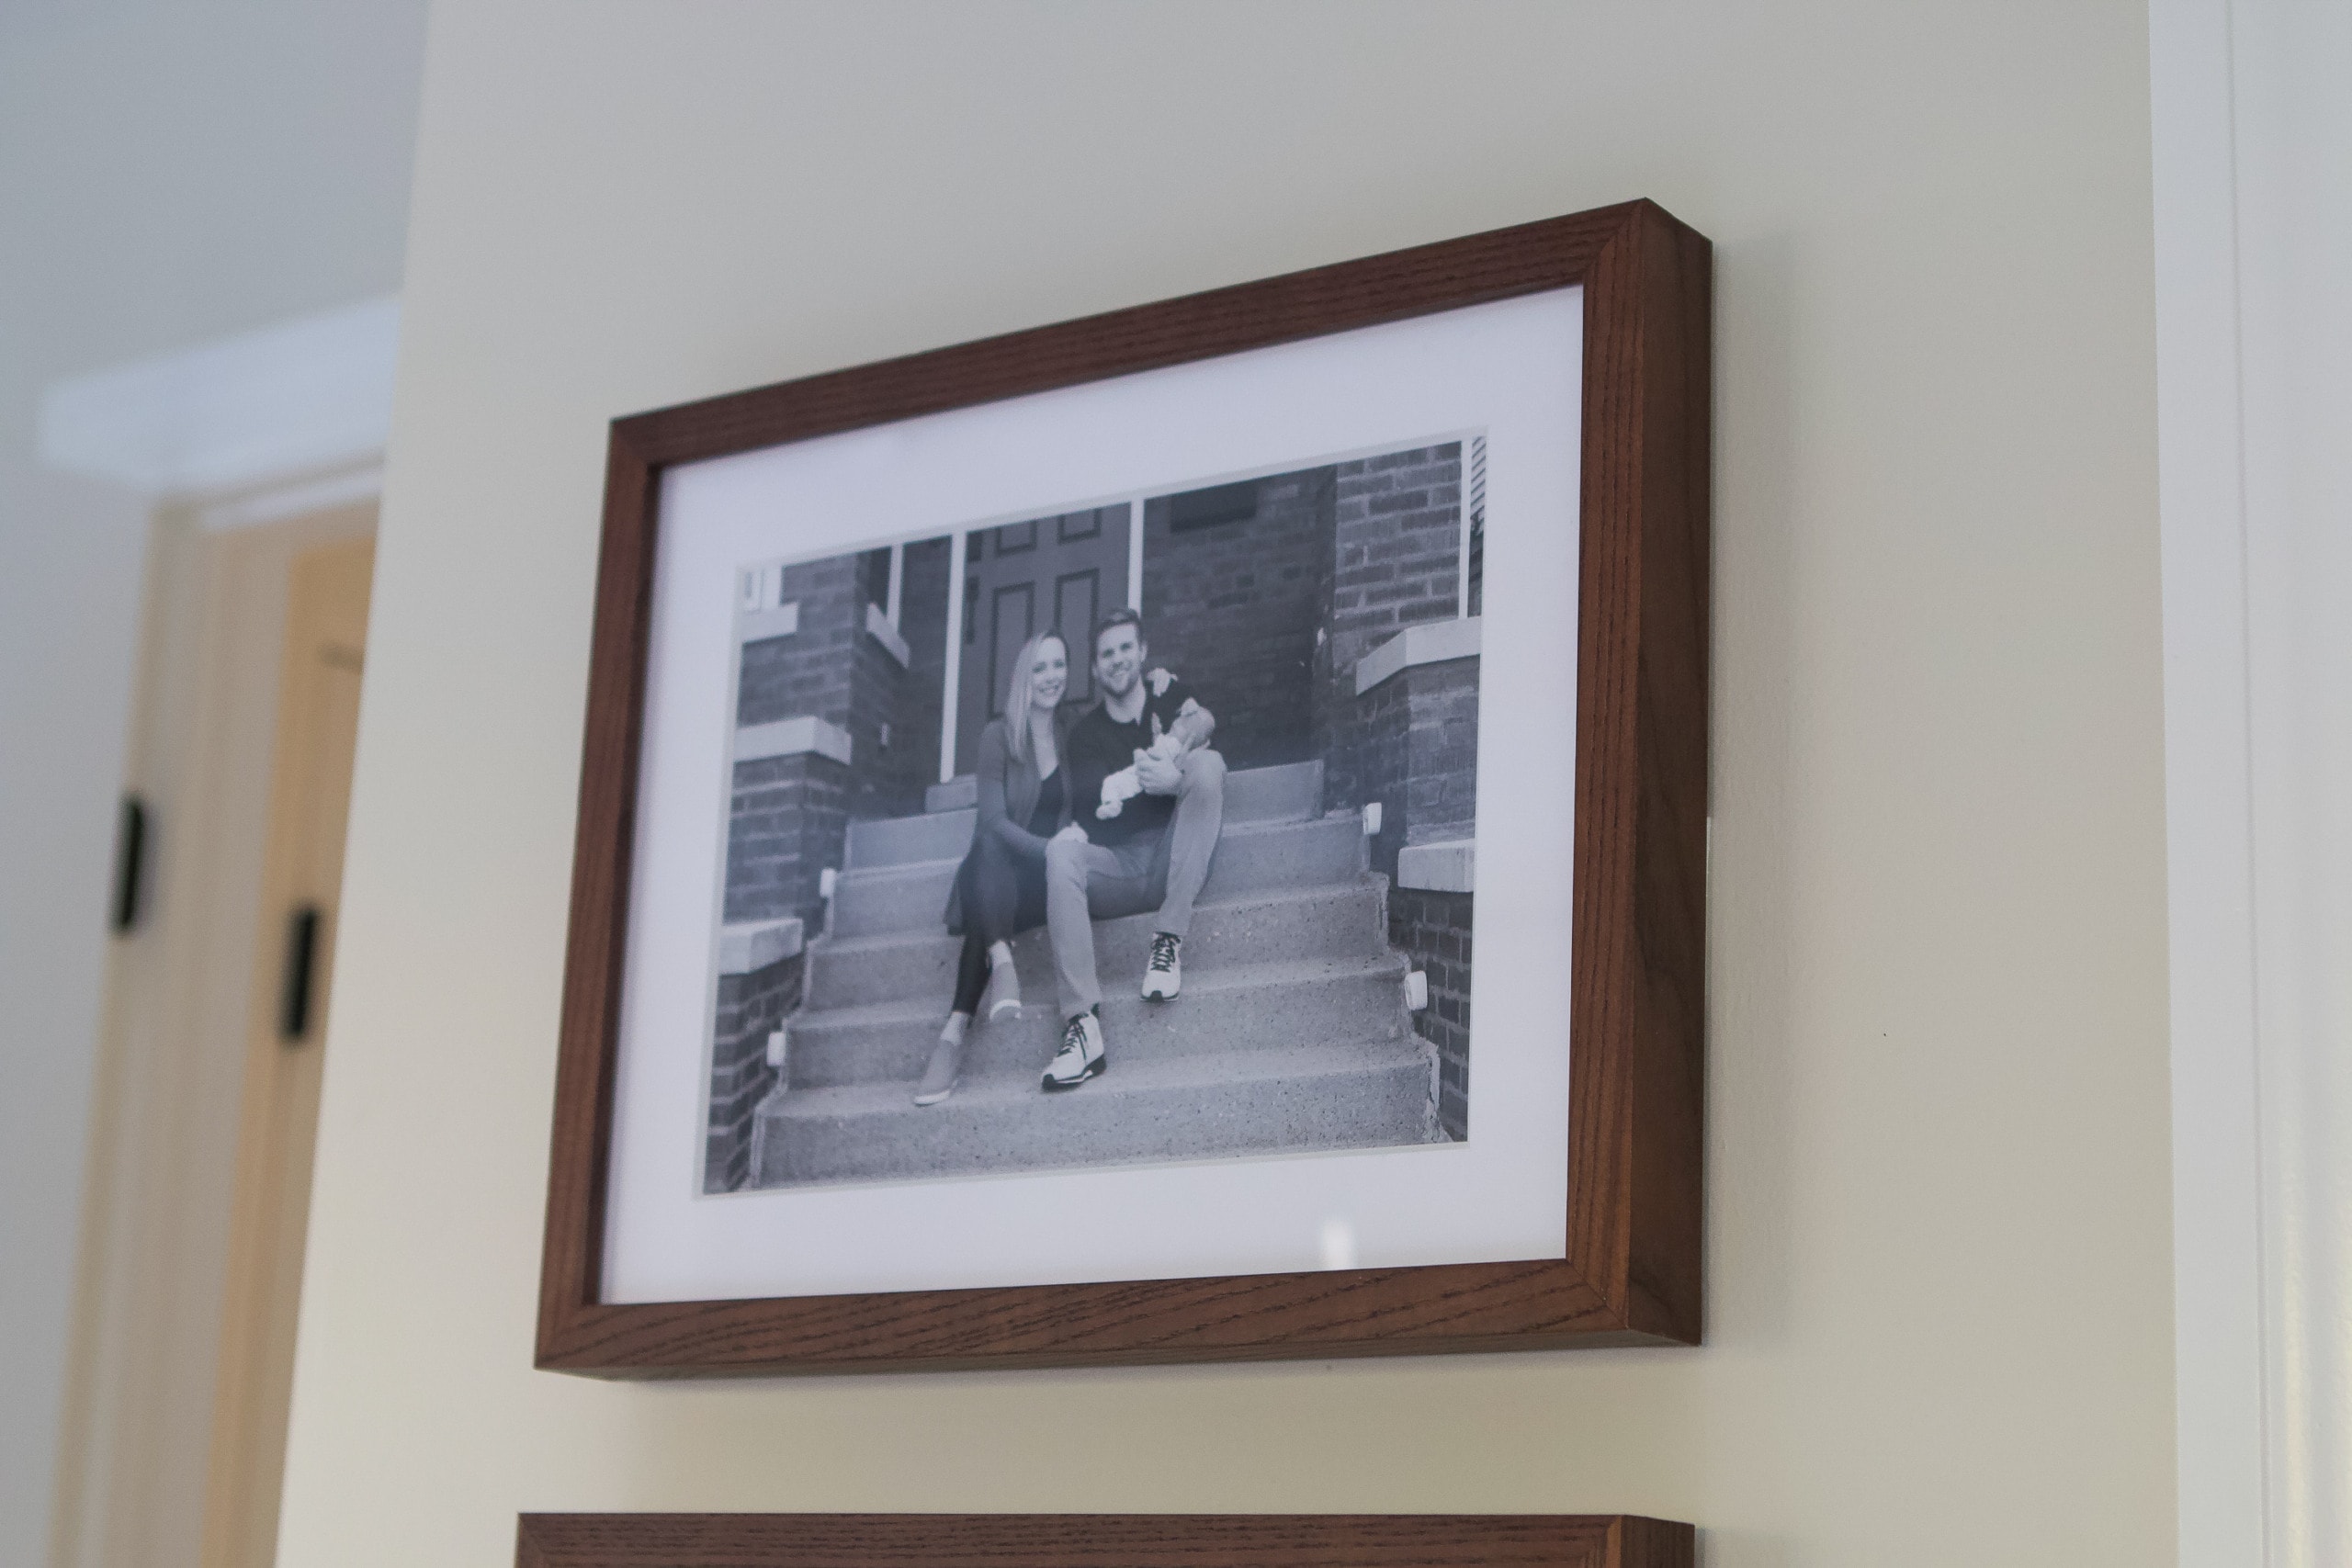 Tips to display family photos in your home